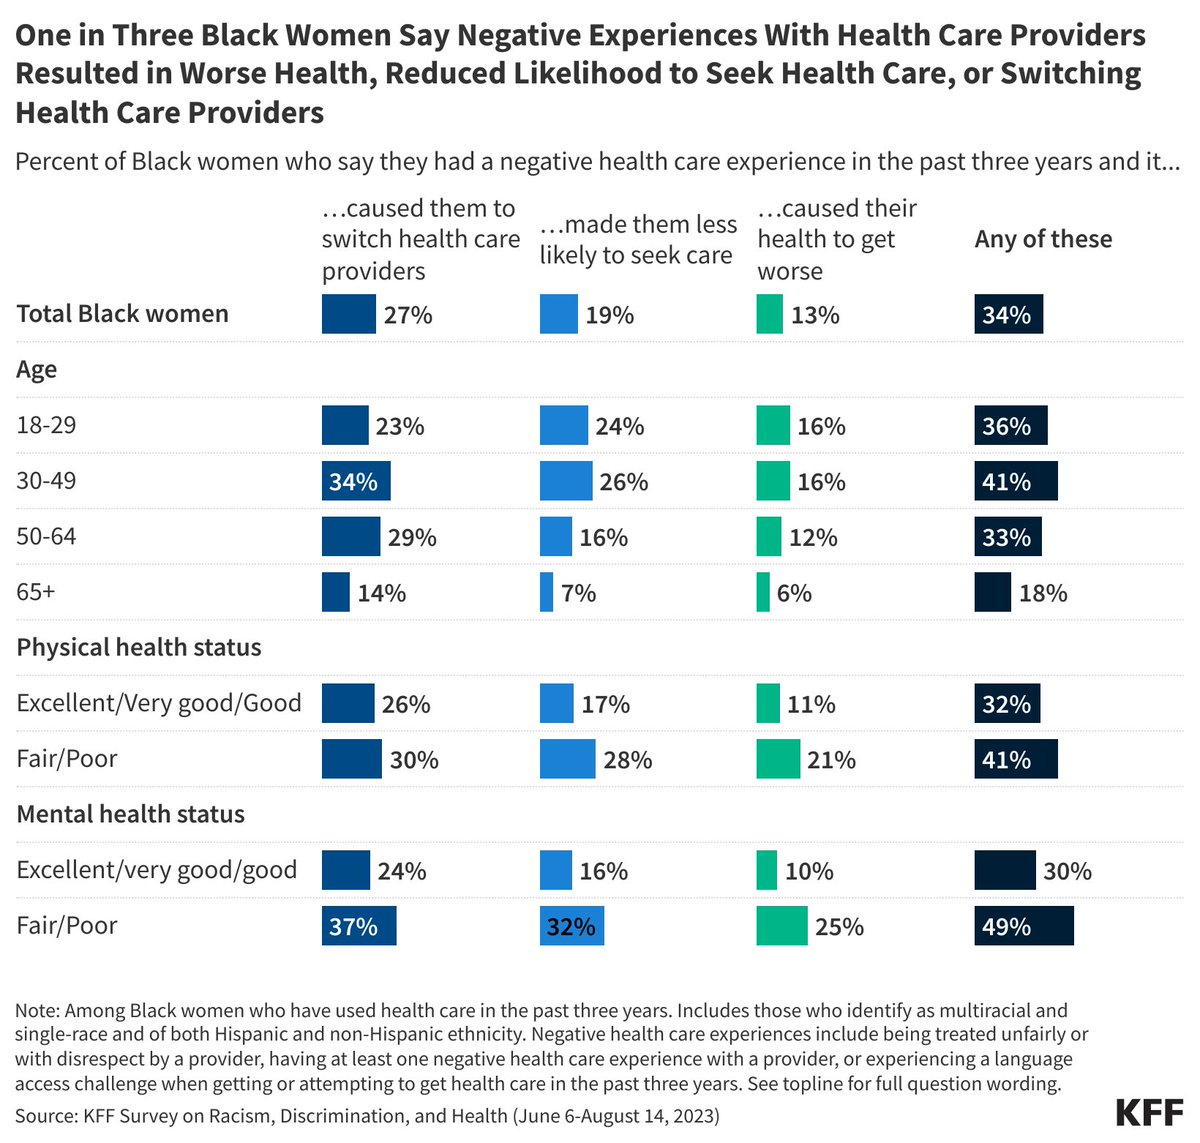 Among Black women who used health care in the past three years, 34% report at least one of three consequences resulting from a negative experience with a provider: switching providers, being less likely to seek care, or worse health. bit.ly/44Bkllm